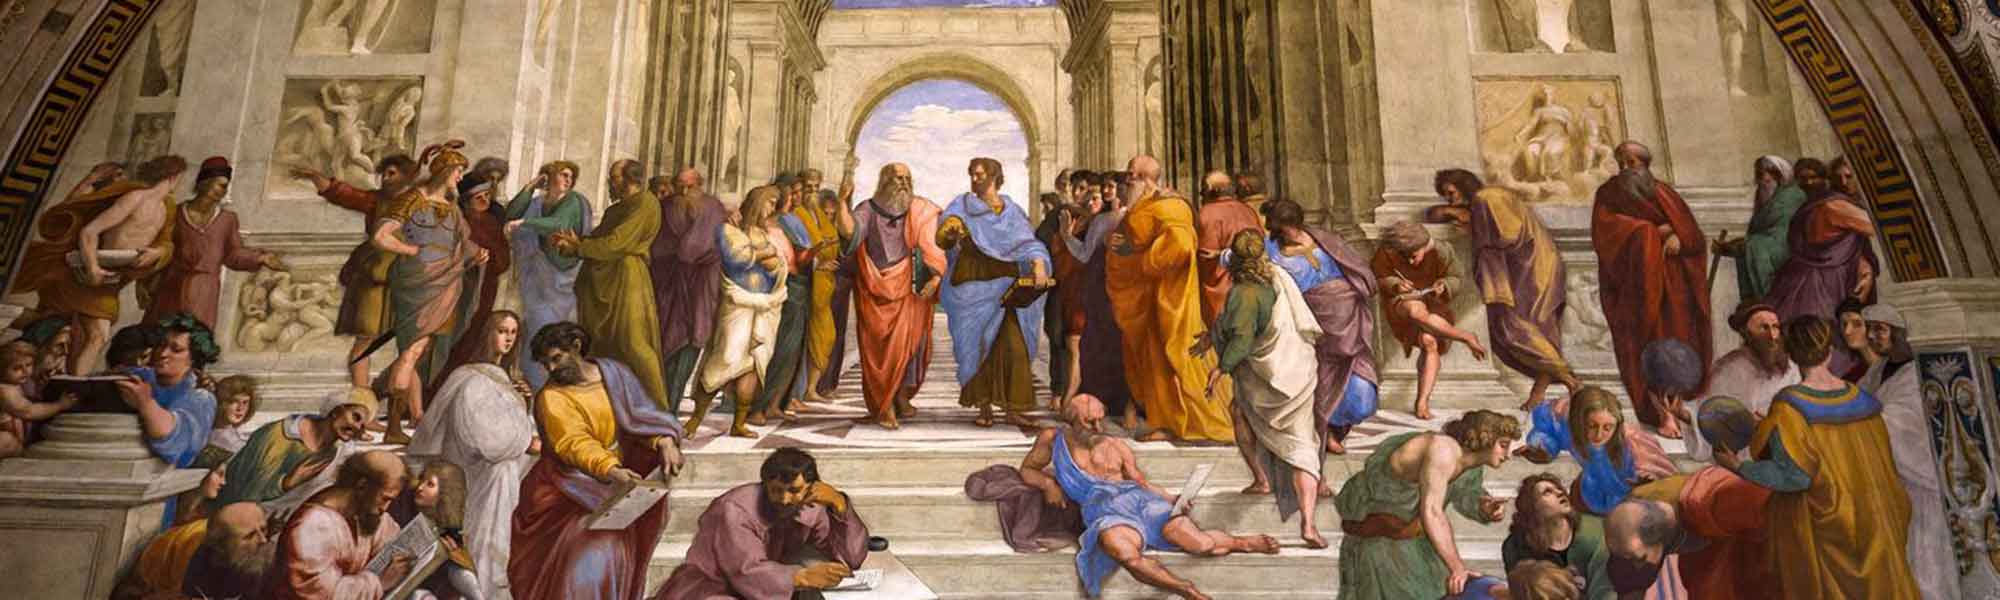 The School of Athens fresco by Raphael